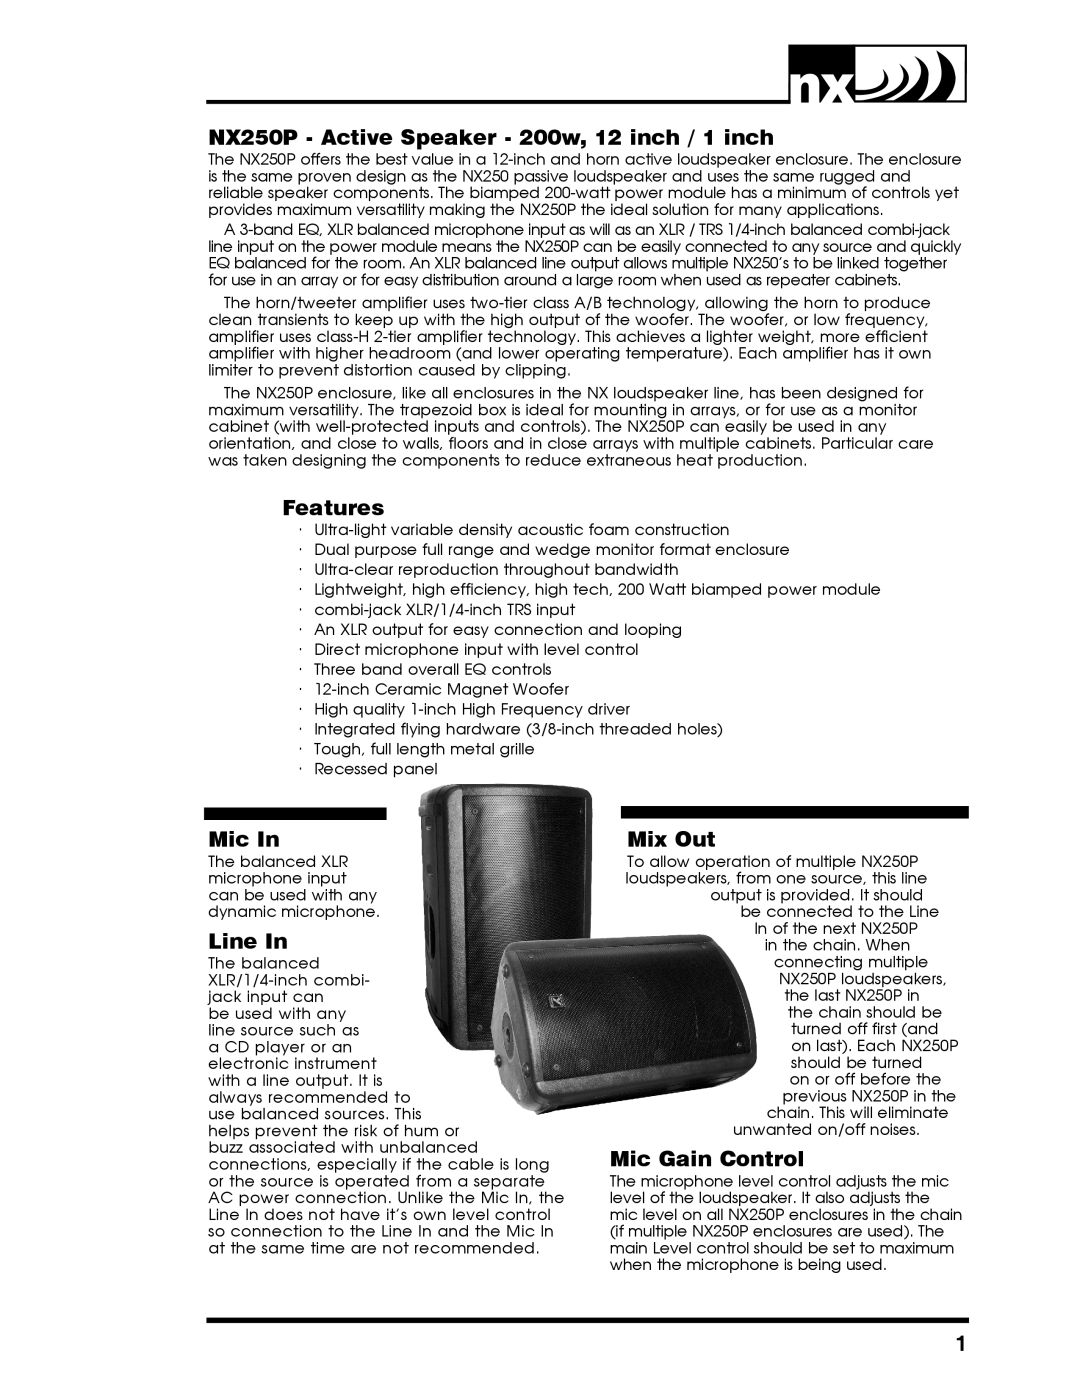 Yorkville Sound YS1030 owner manual NX250P - Active Speaker - 200w, 12 inch / 1 inch, Features, Mic In, Line In, Mix Out 